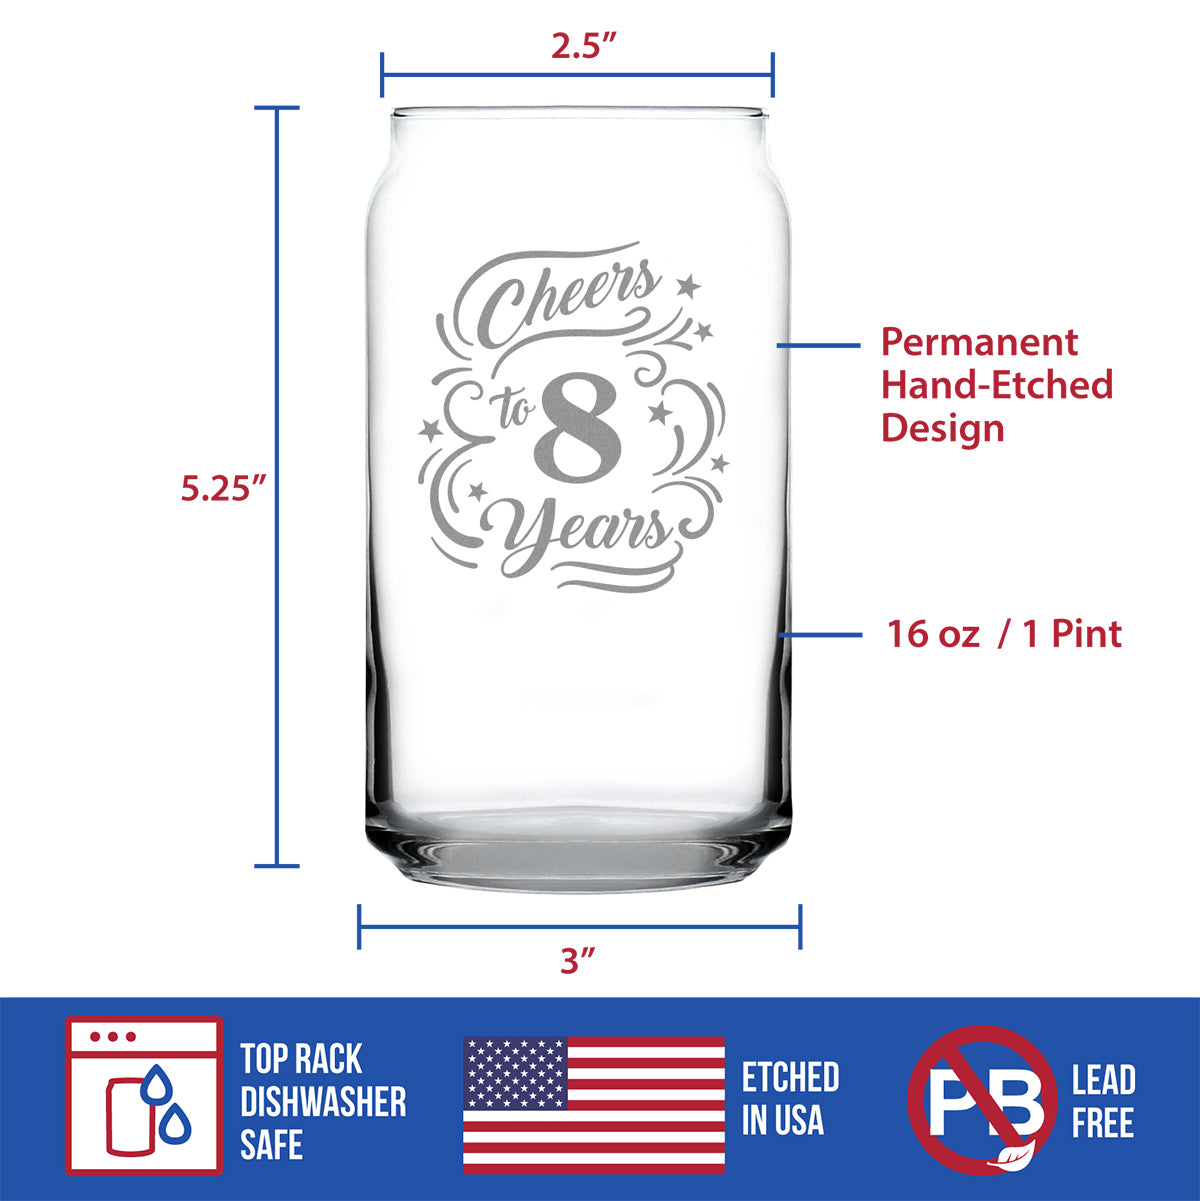 Cheers to 8 Years - Beer Can Pint Glass Gifts for Women &amp; Men - 8th Anniversary Party Decor - 16 Oz Glasses